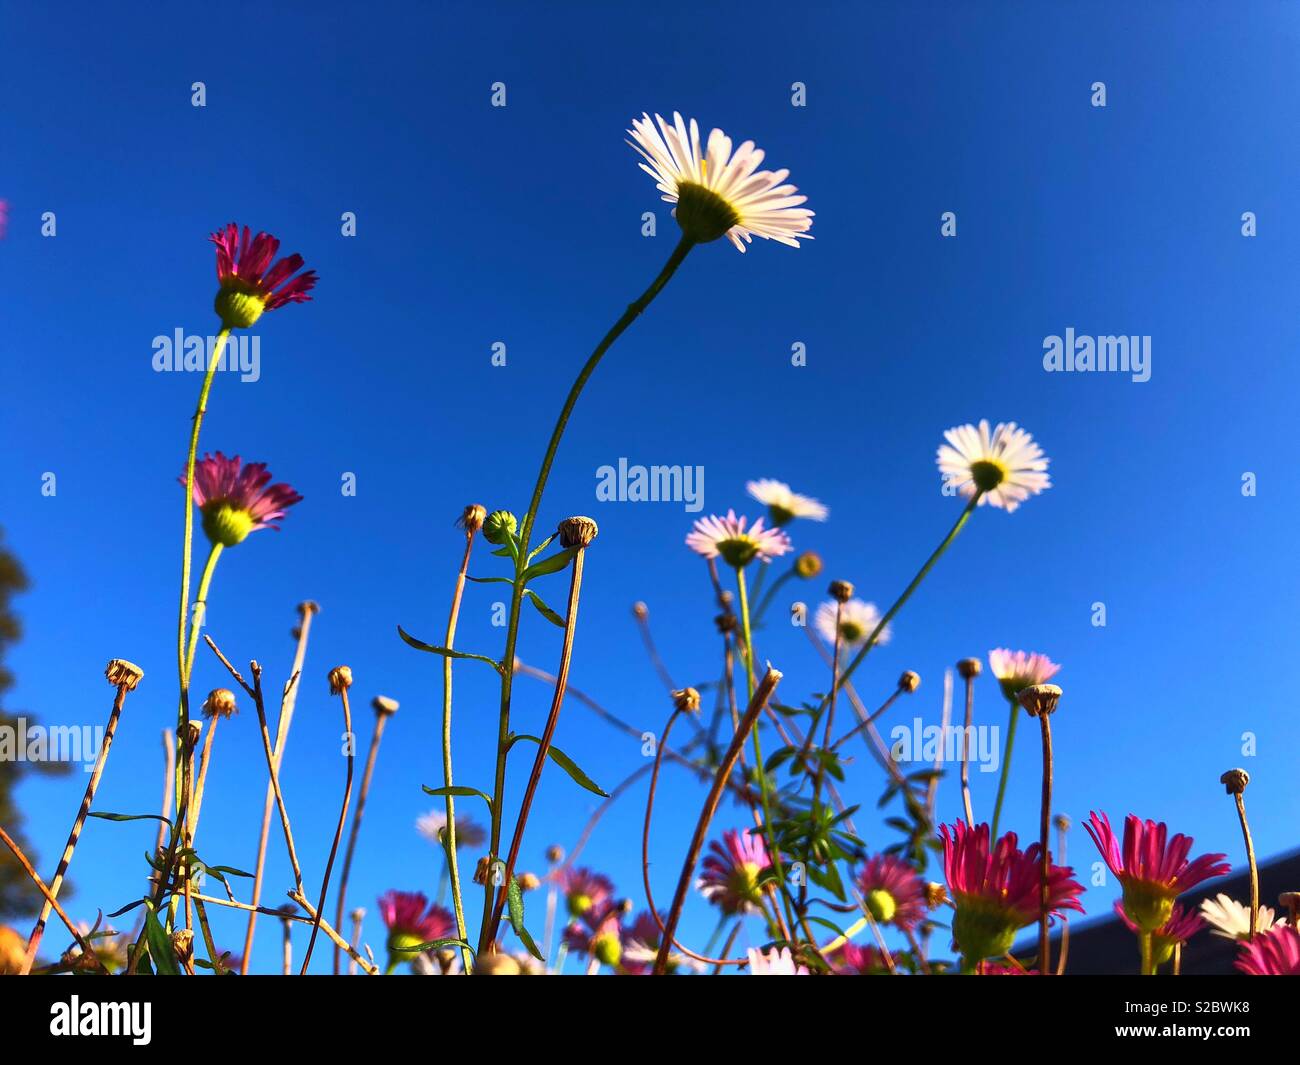 Daisy type flowers against a blue sky, October. Stock Photo